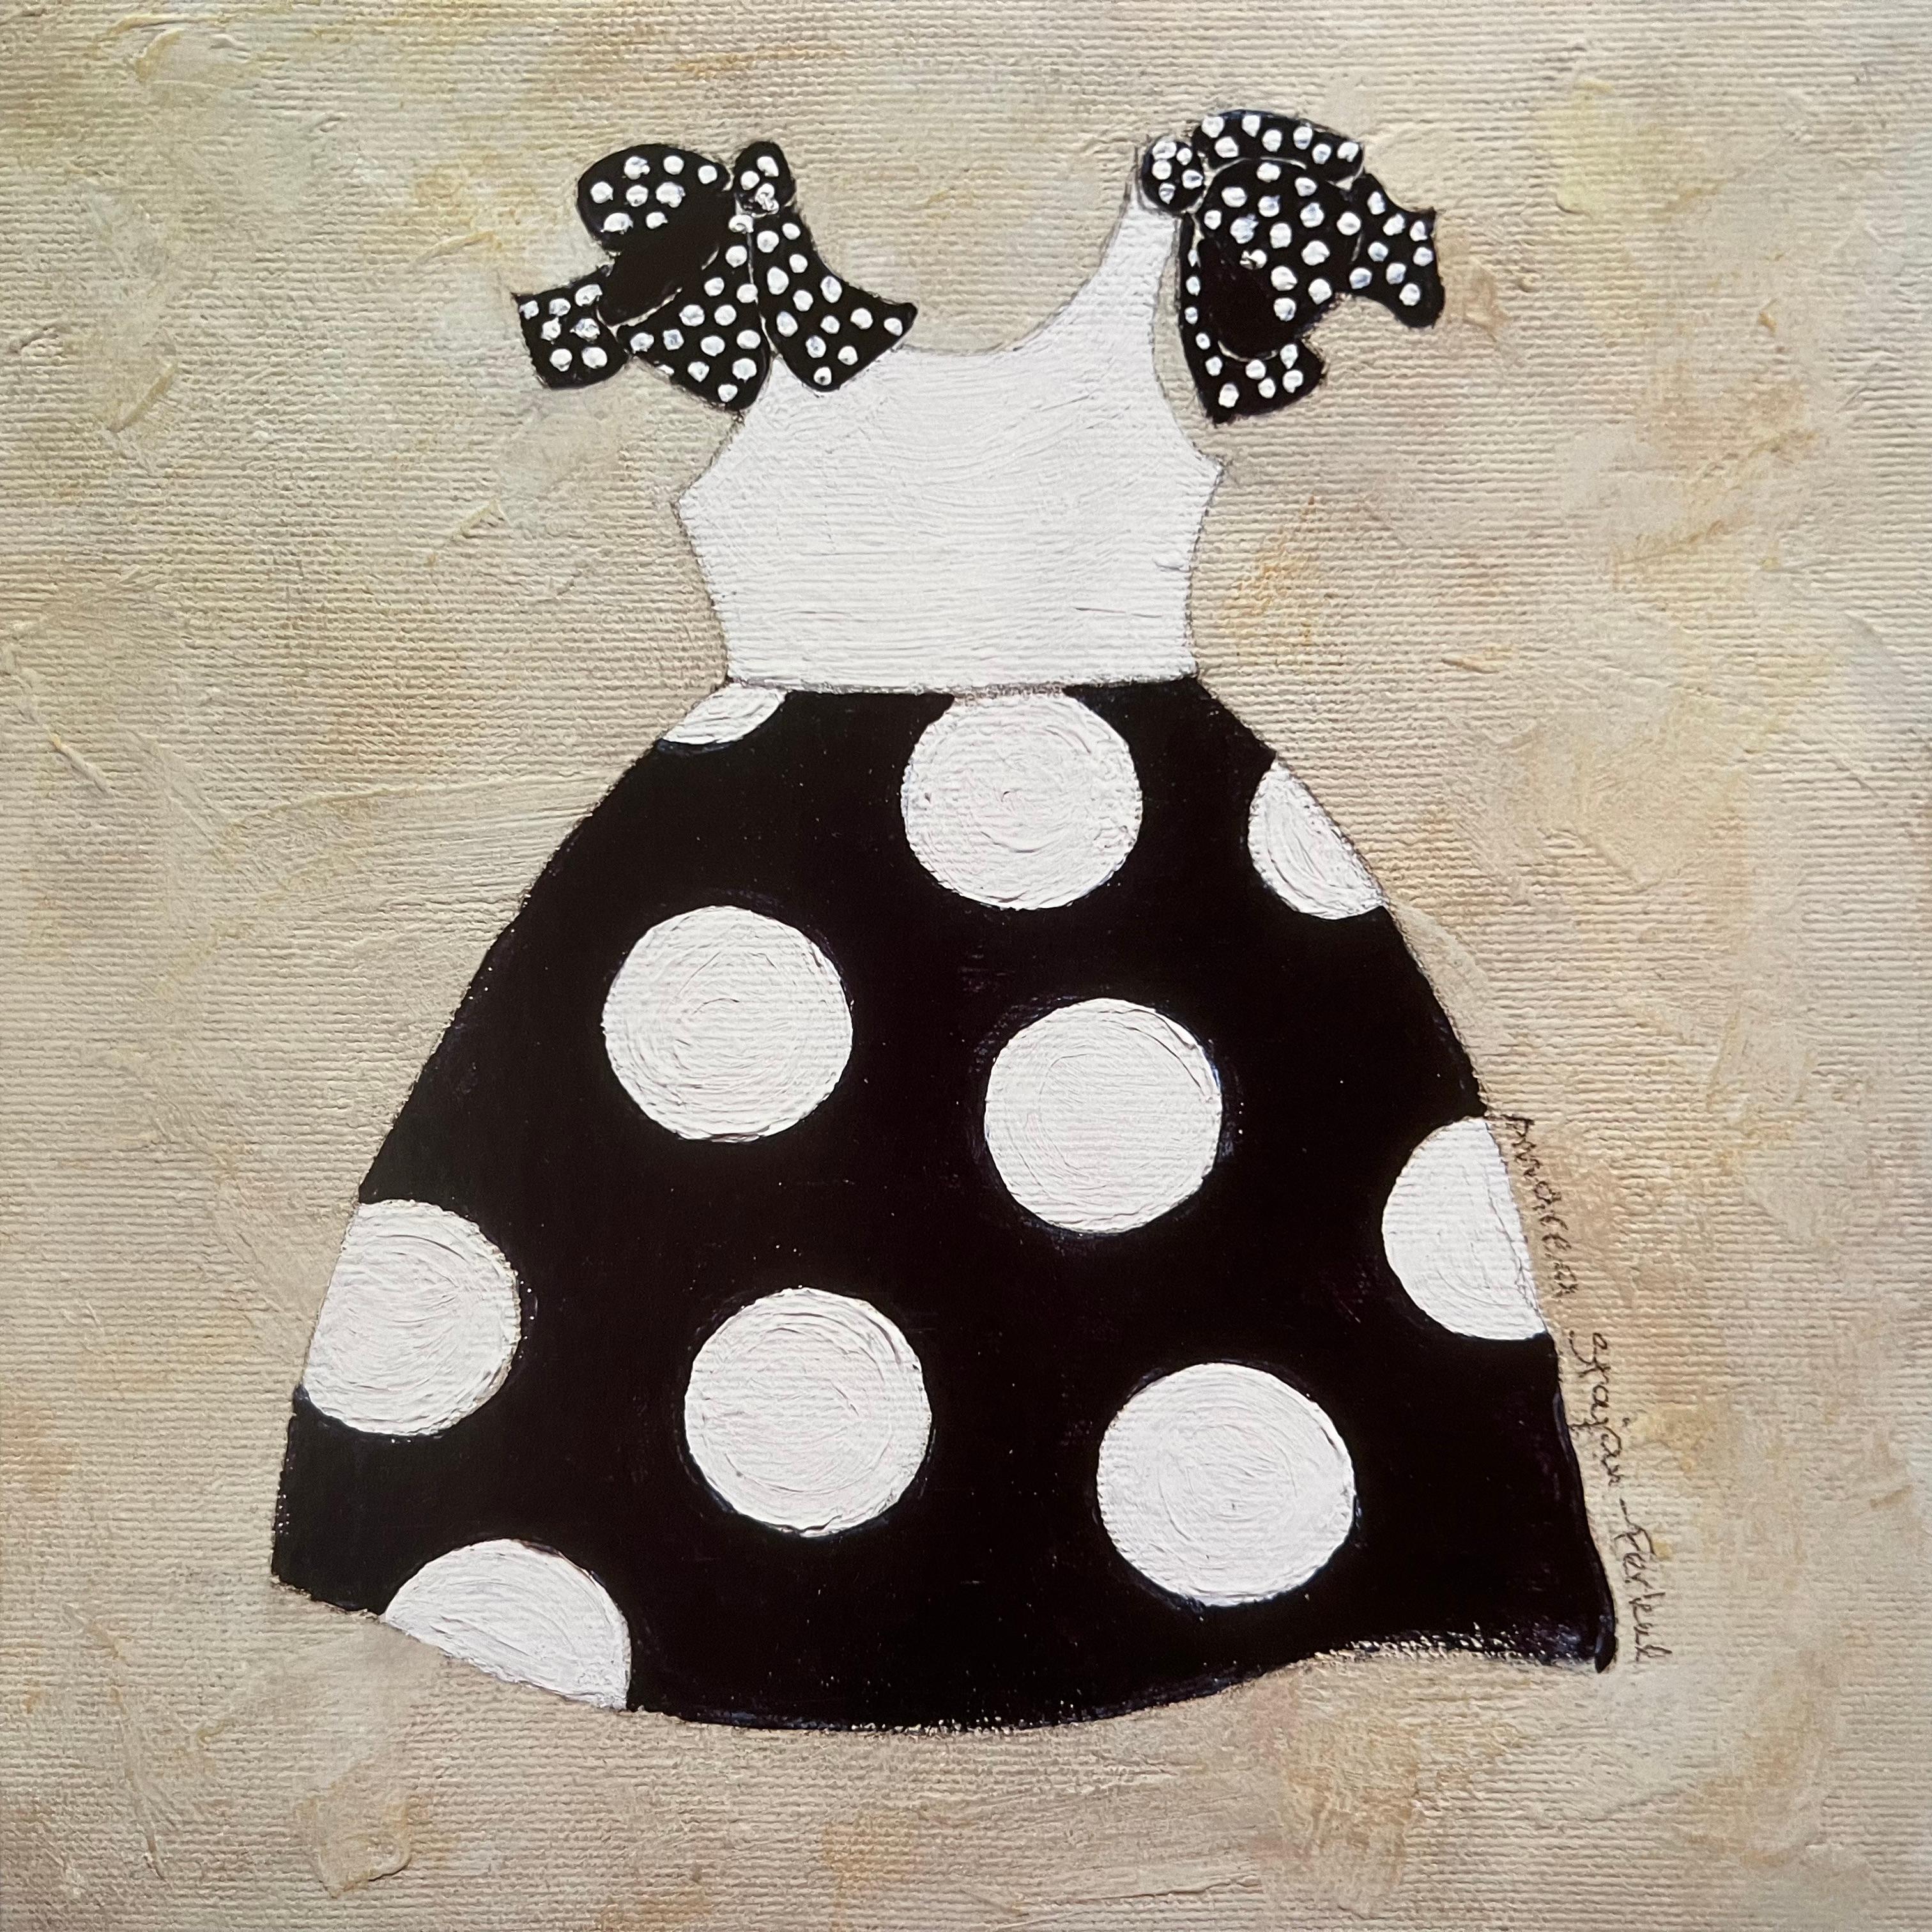 This children's Art Print on recycled paper features a delightfully sweet little girls dress. The contemporary and timeless aesthetic makes it perfect for a child's room or nursery. Hand signed on back. This is #2 from a series of three dresses.